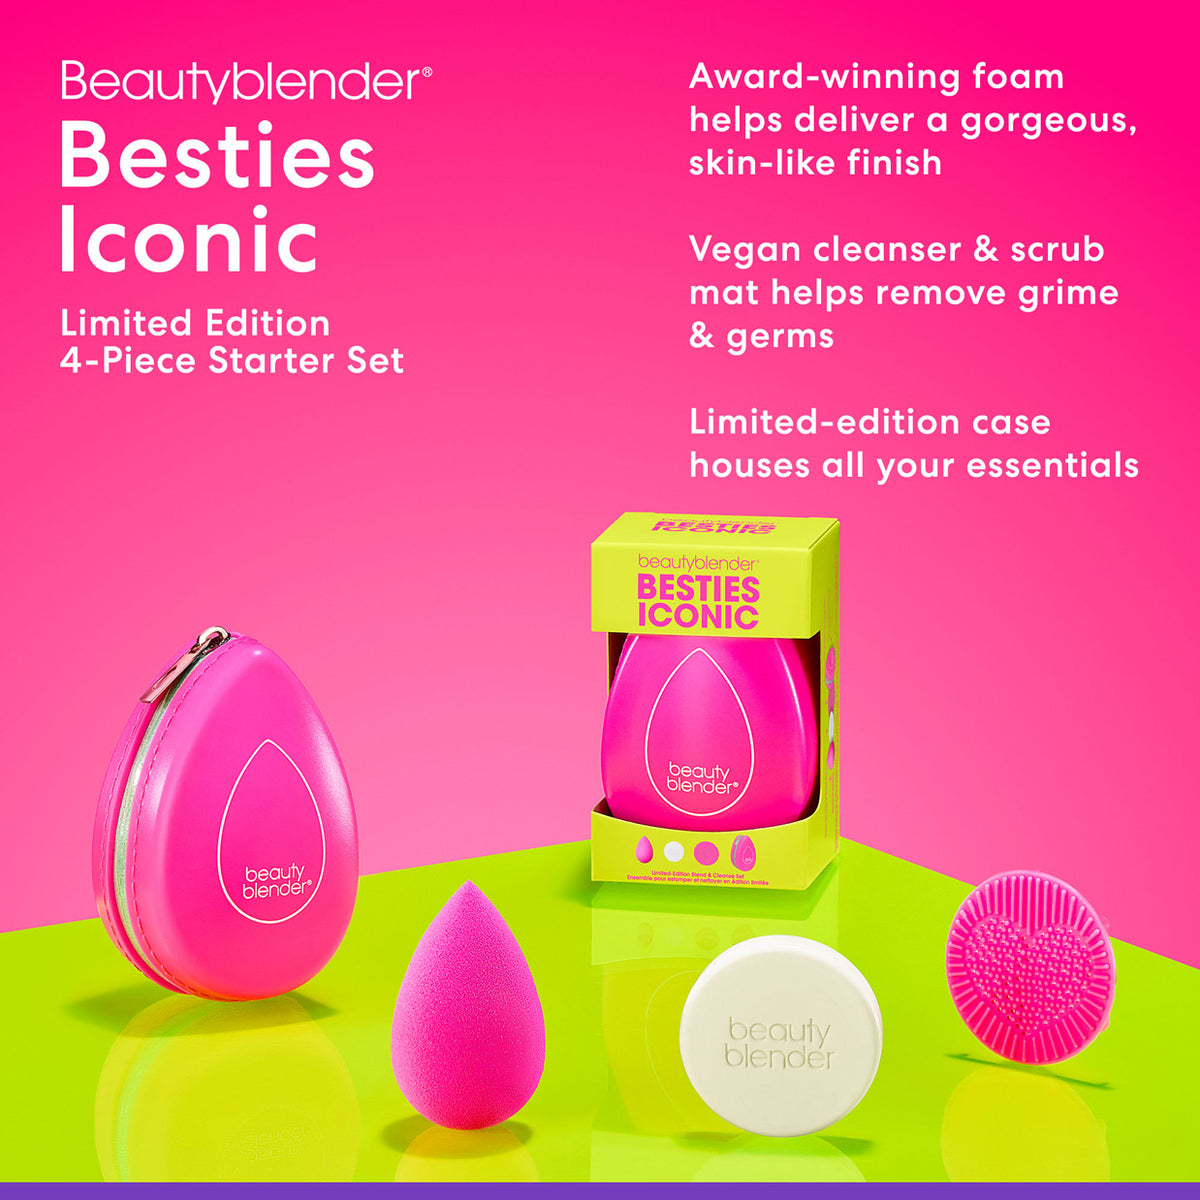 Besties Iconic Limited Edition 4-Piece Starter Set.